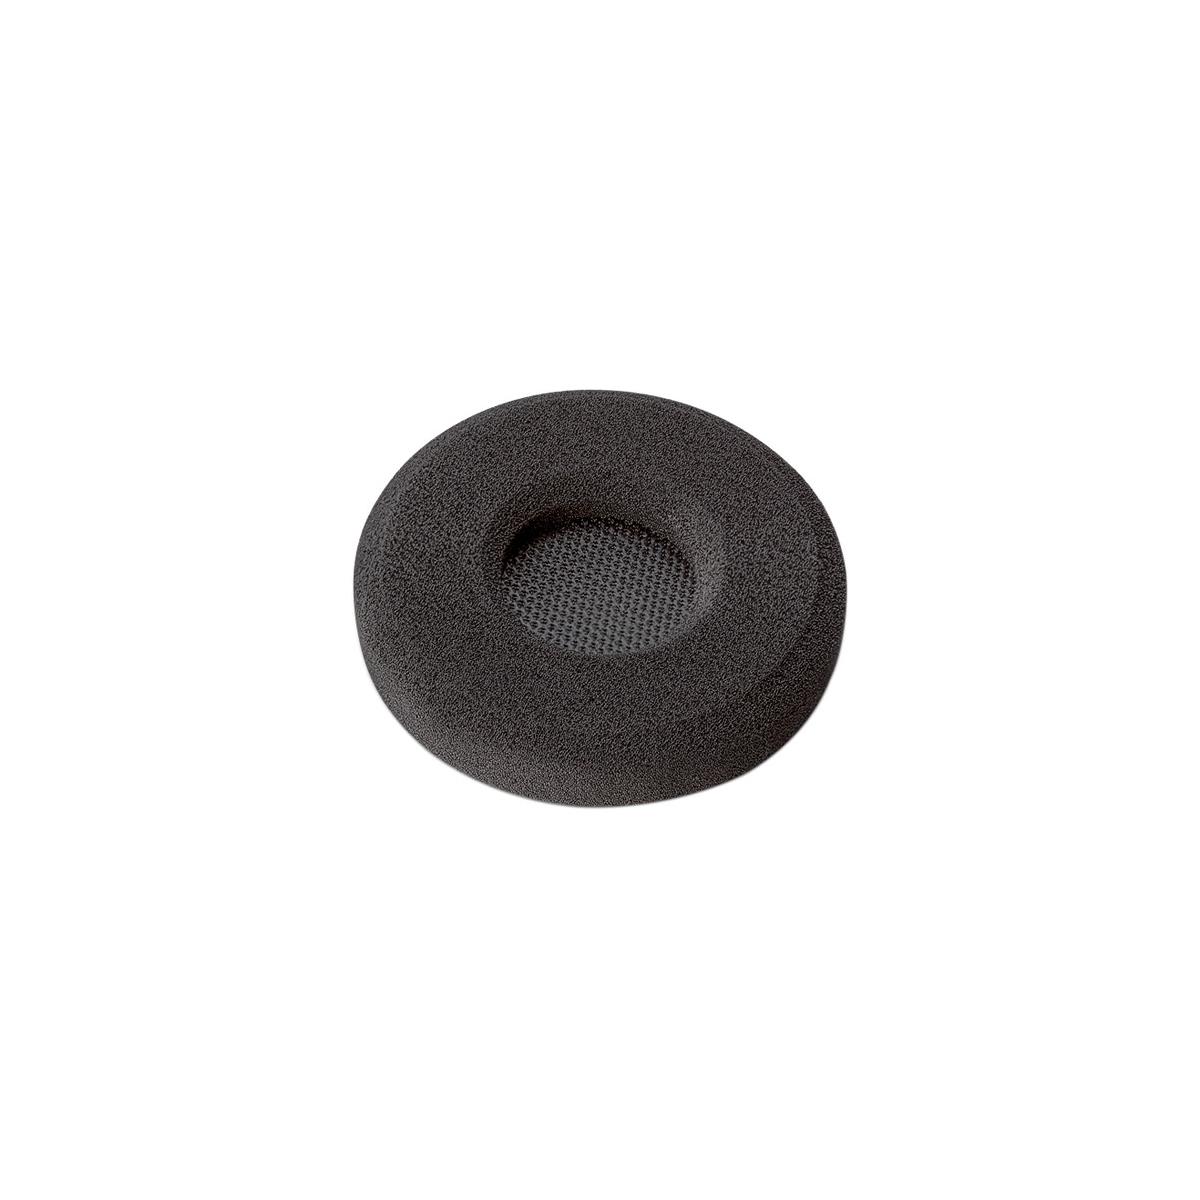 Photos - Other Sound & Hi-Fi Poly Plantronics Spare Ear Foam Cushion for HW510 and HW520 Headphones, 2-Pack 